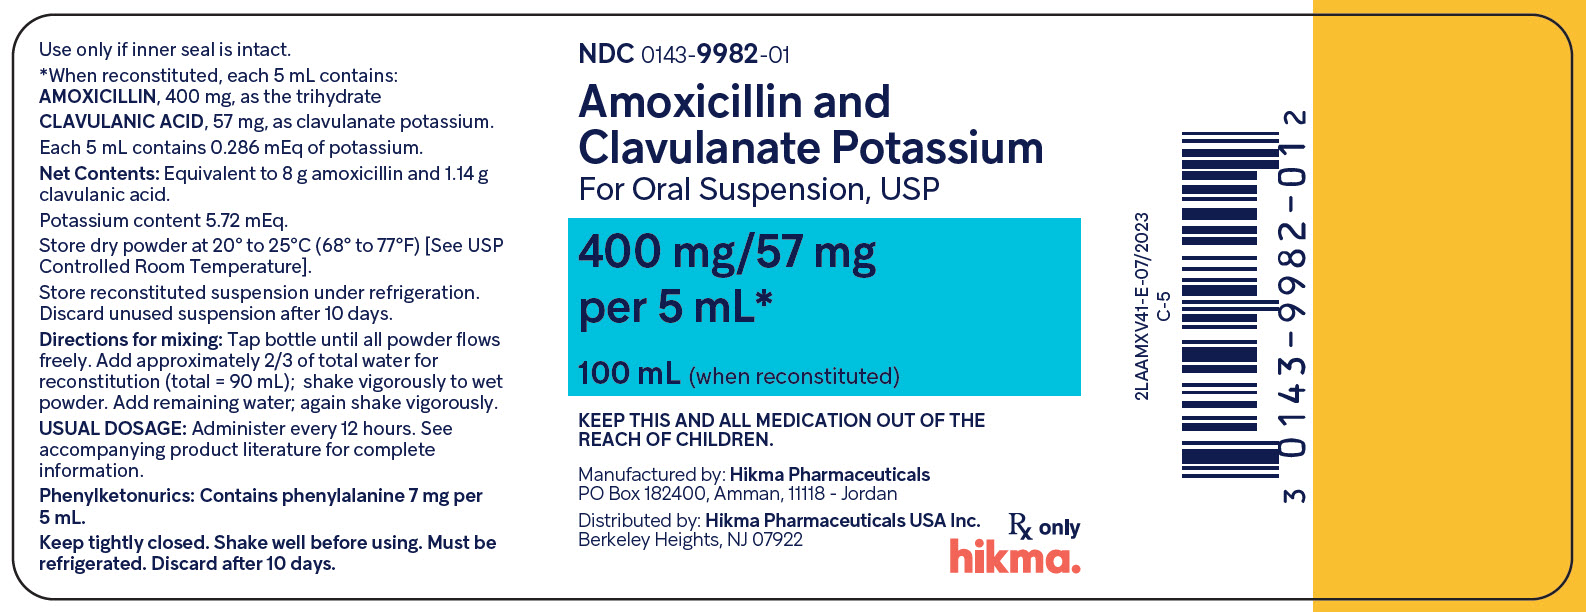 Amoxicillin and Clavulanate Potassium For Oral Suspension USP, 400 mg/57 mg per 5 mL* 100 mL (when reconstituted) - bottle label